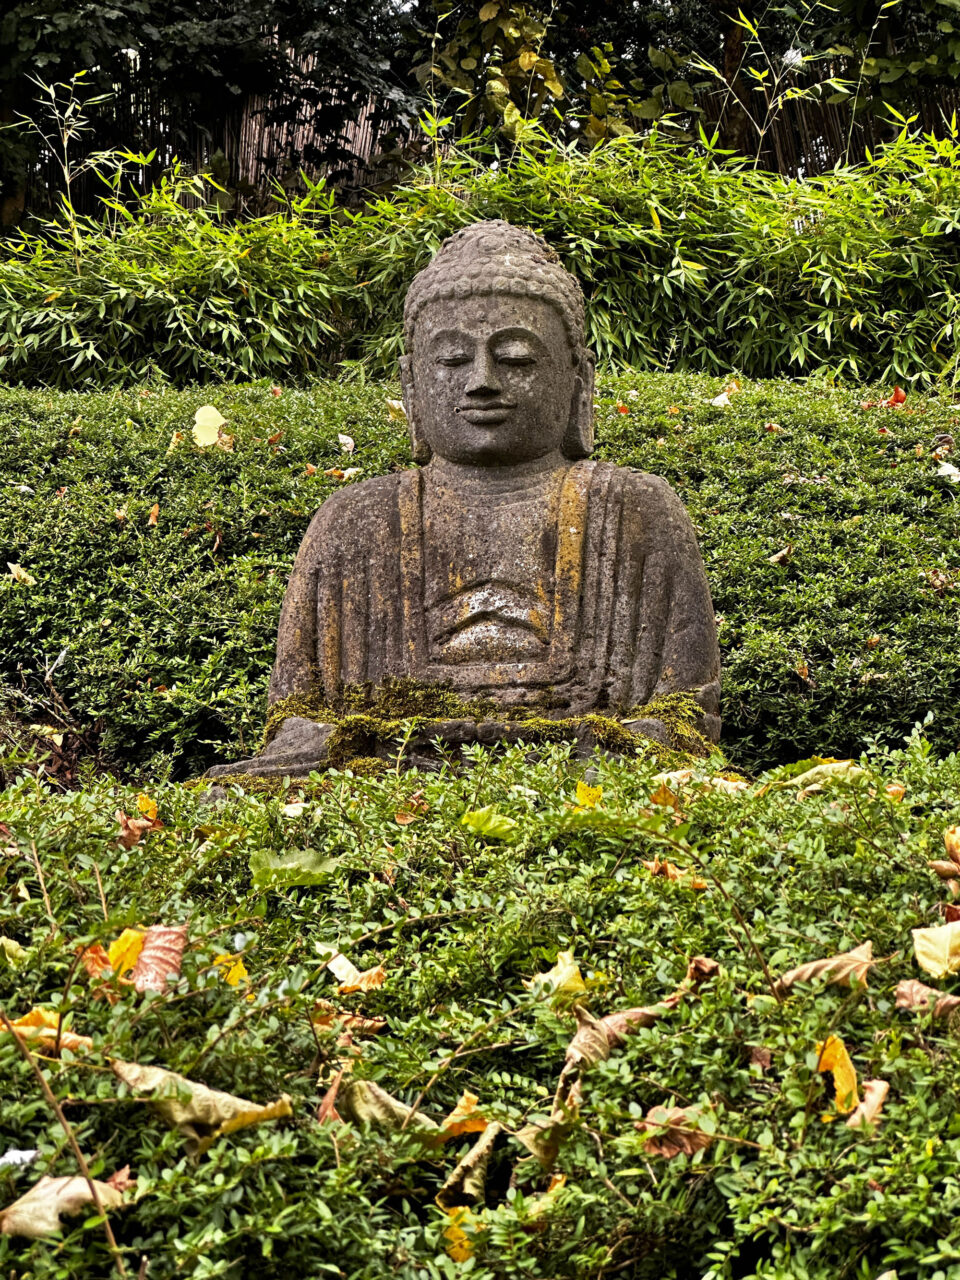 A picturesque Buddha.